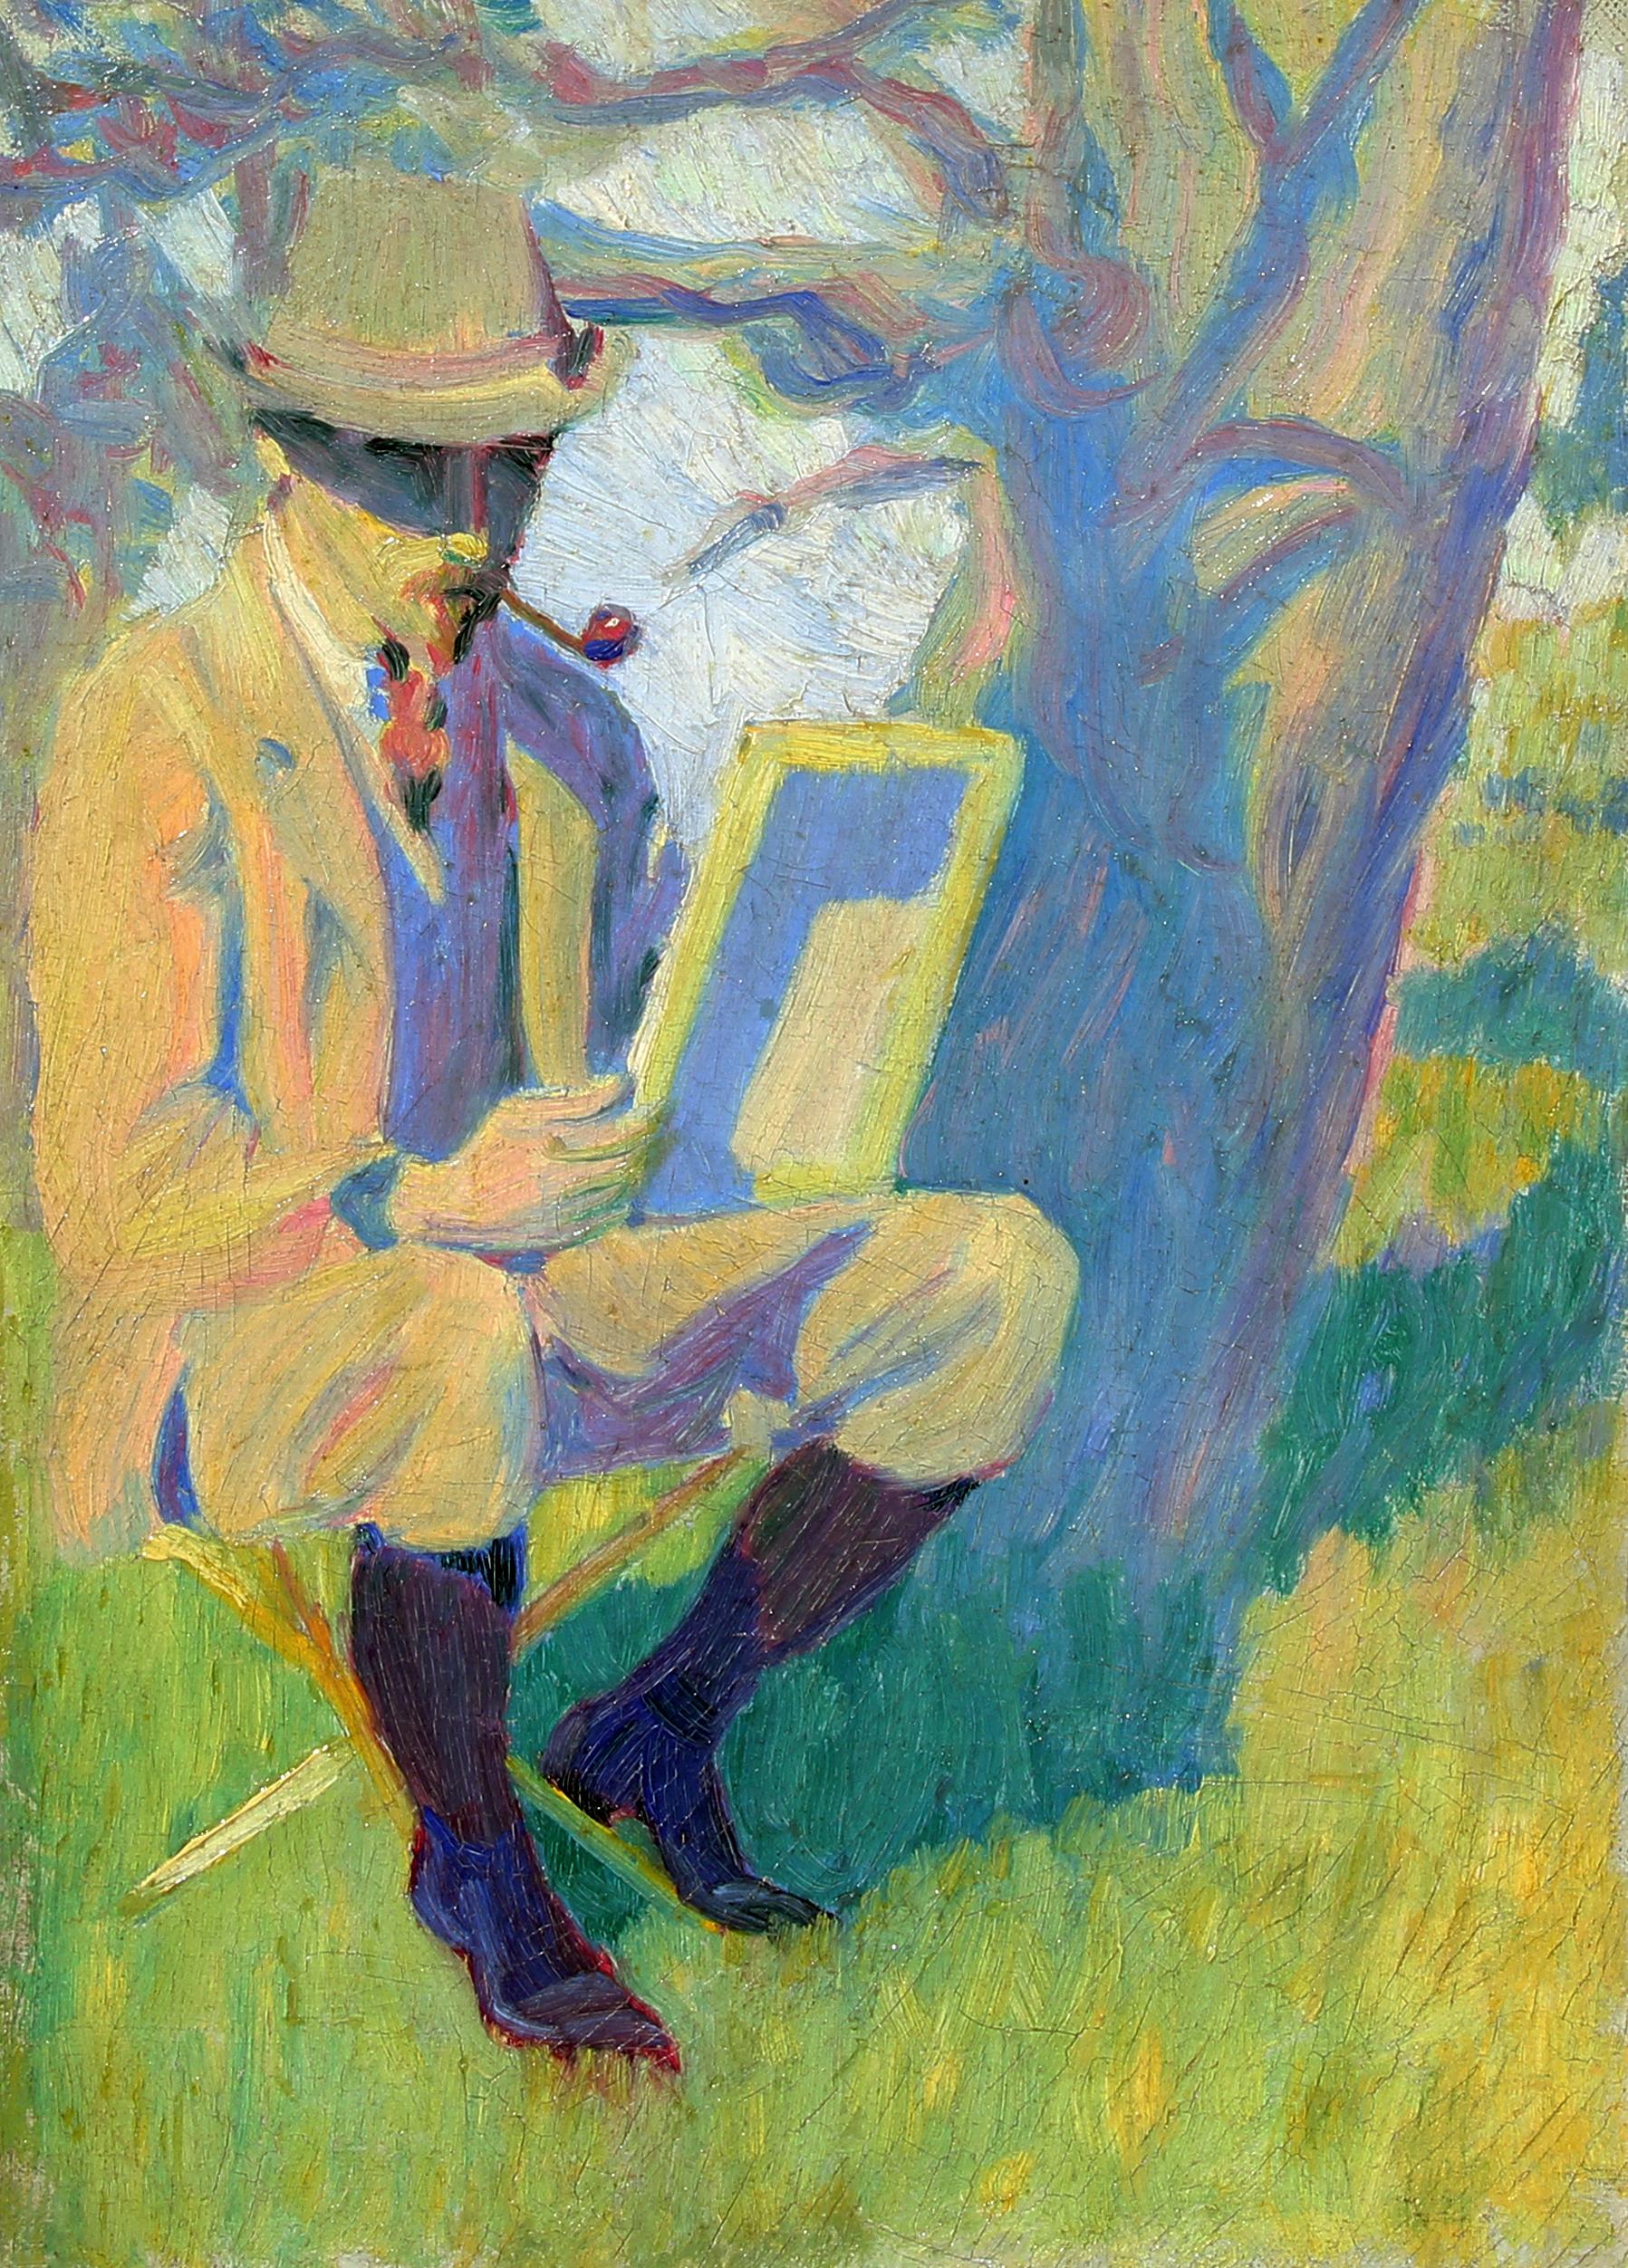 THOMAS BUFORD METEYARD
American, 1865–1928

Self-Portrait, Arcachon

Oil on canvas
14 x 10 inches (35.5 x 25.4 cm)
Framed: 19¾ x 16 inches (50.2 x 40.6 cm)

Painted in 1892.

Provenance
Estate of the Artist

Exhibited
Cambridge, Massachusetts,